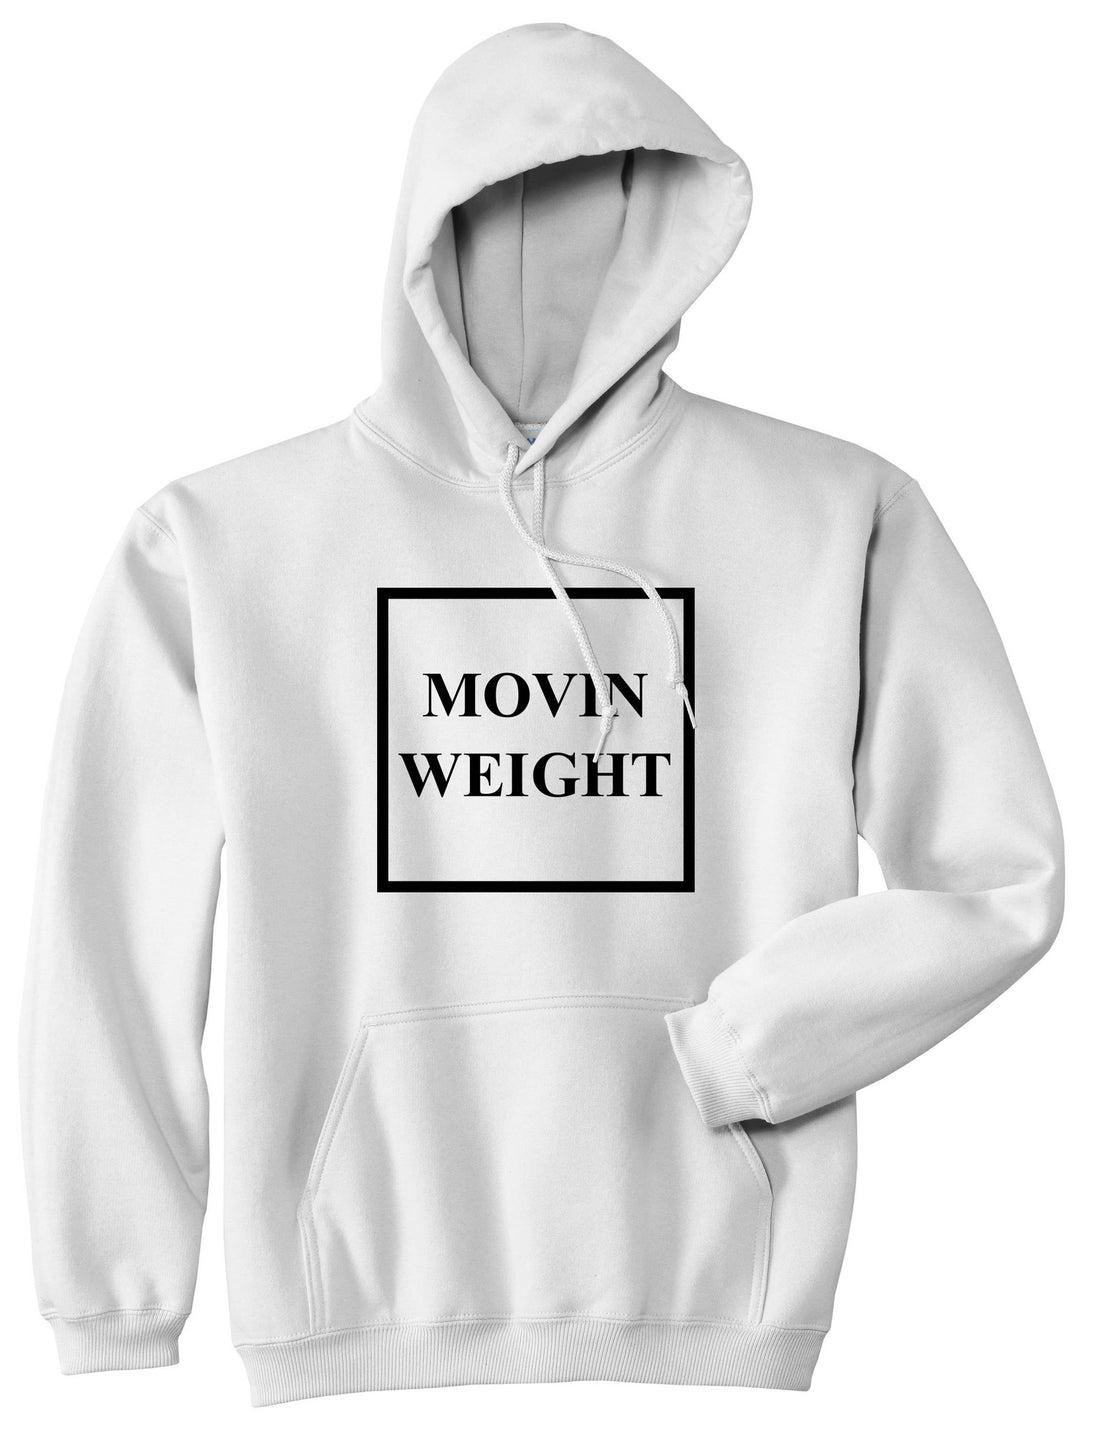 Movin Weight Hustler Boys Kids Pullover Hoodie Hoody in White by Kings Of NY